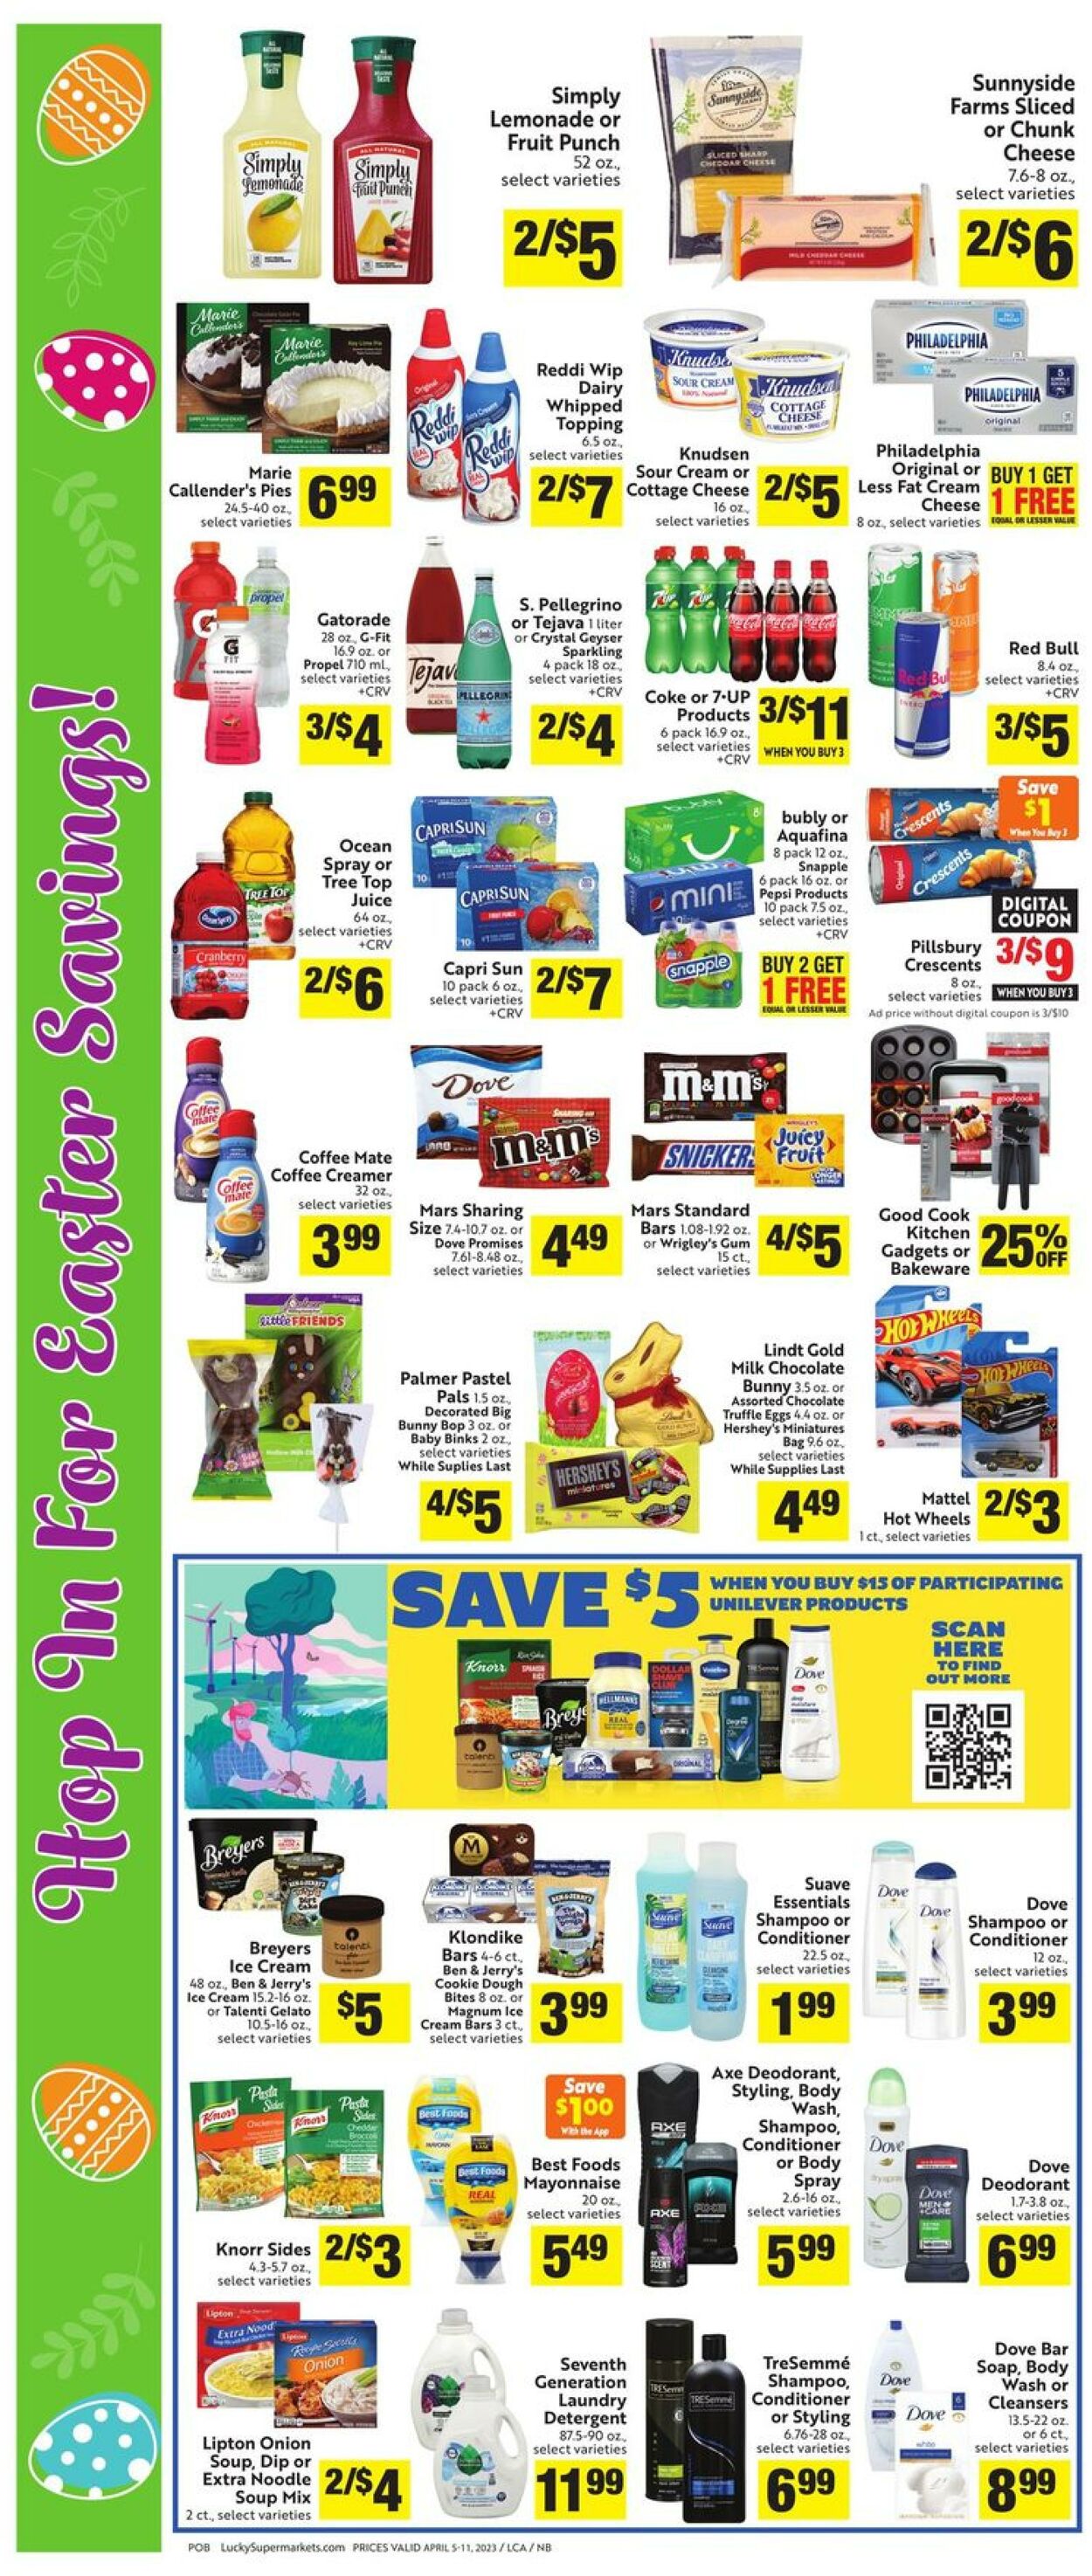 Weekly ad Lucky Supermarkets 04/05/2023 - 04/11/2023